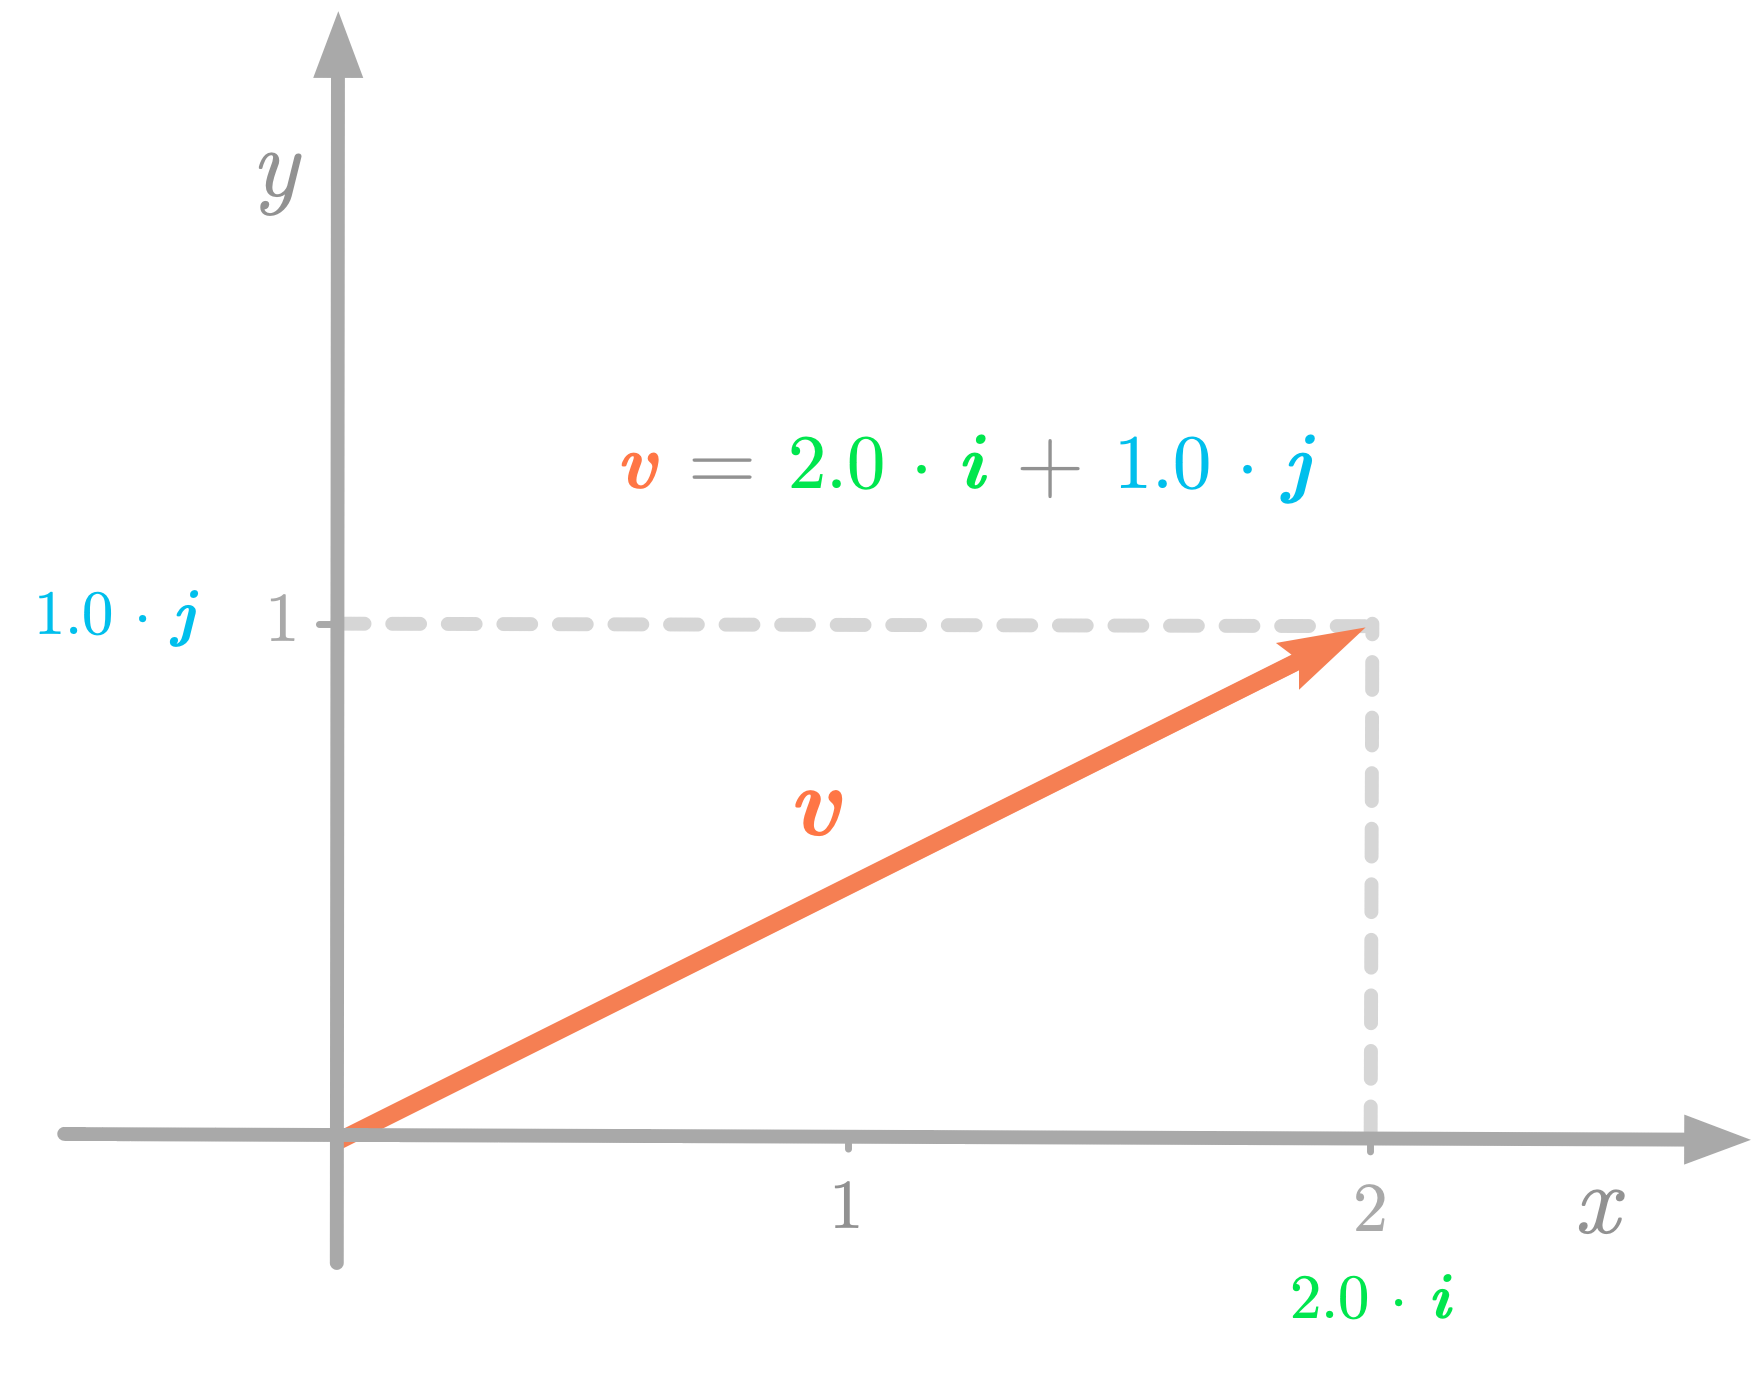 Figure 5: The vector $\vv$ can be described as a linear combination of the basis vectors $\vi$ and $\vj$.